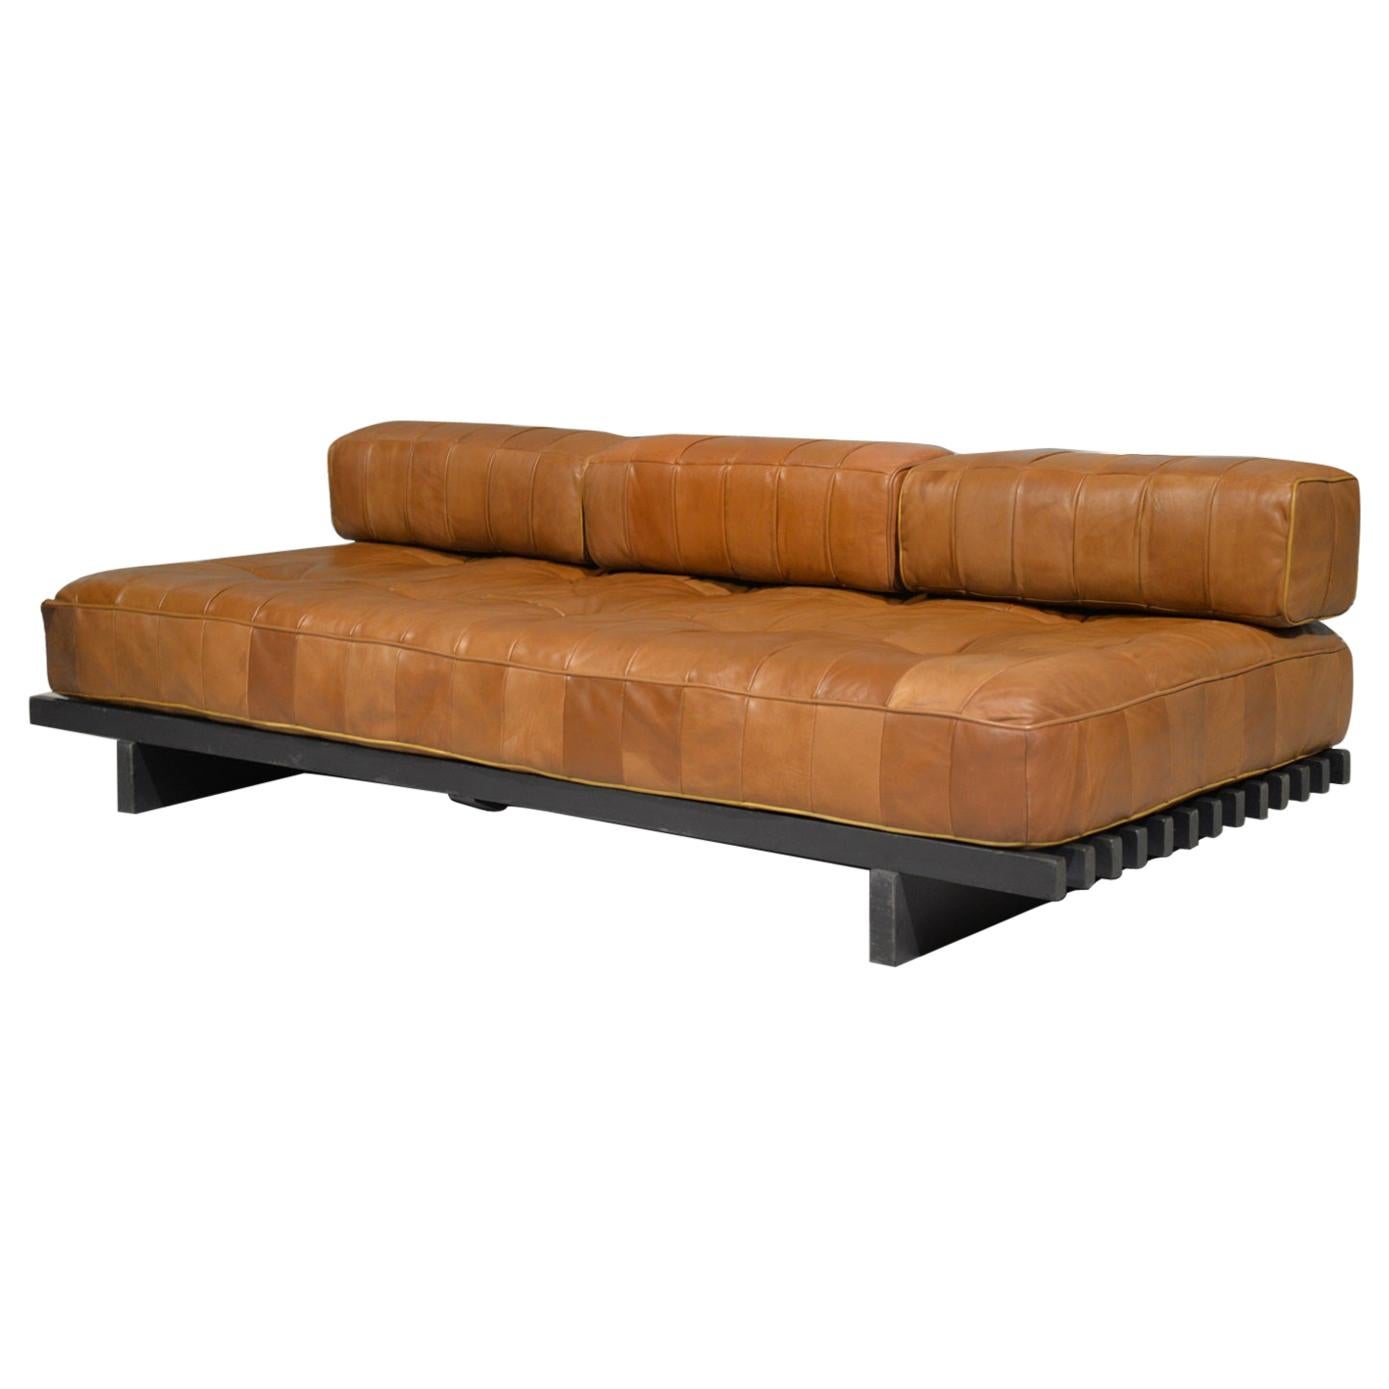 Vintage De Sede DS 80 Leather Patchwork Daybed, Switzerland, 1960s For Sale